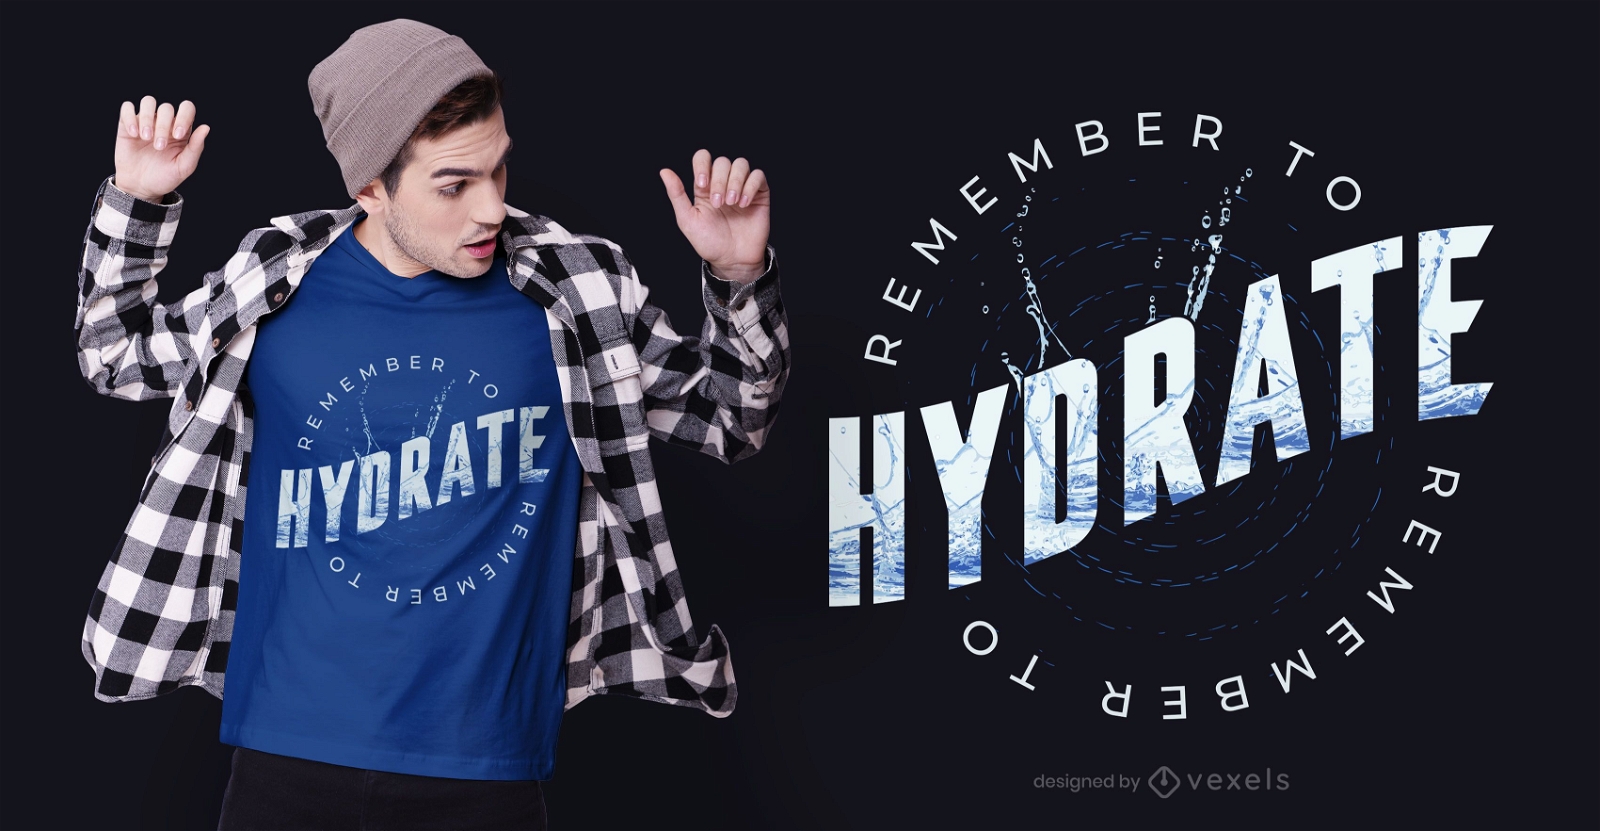 Remember to hydrate t-shirt design